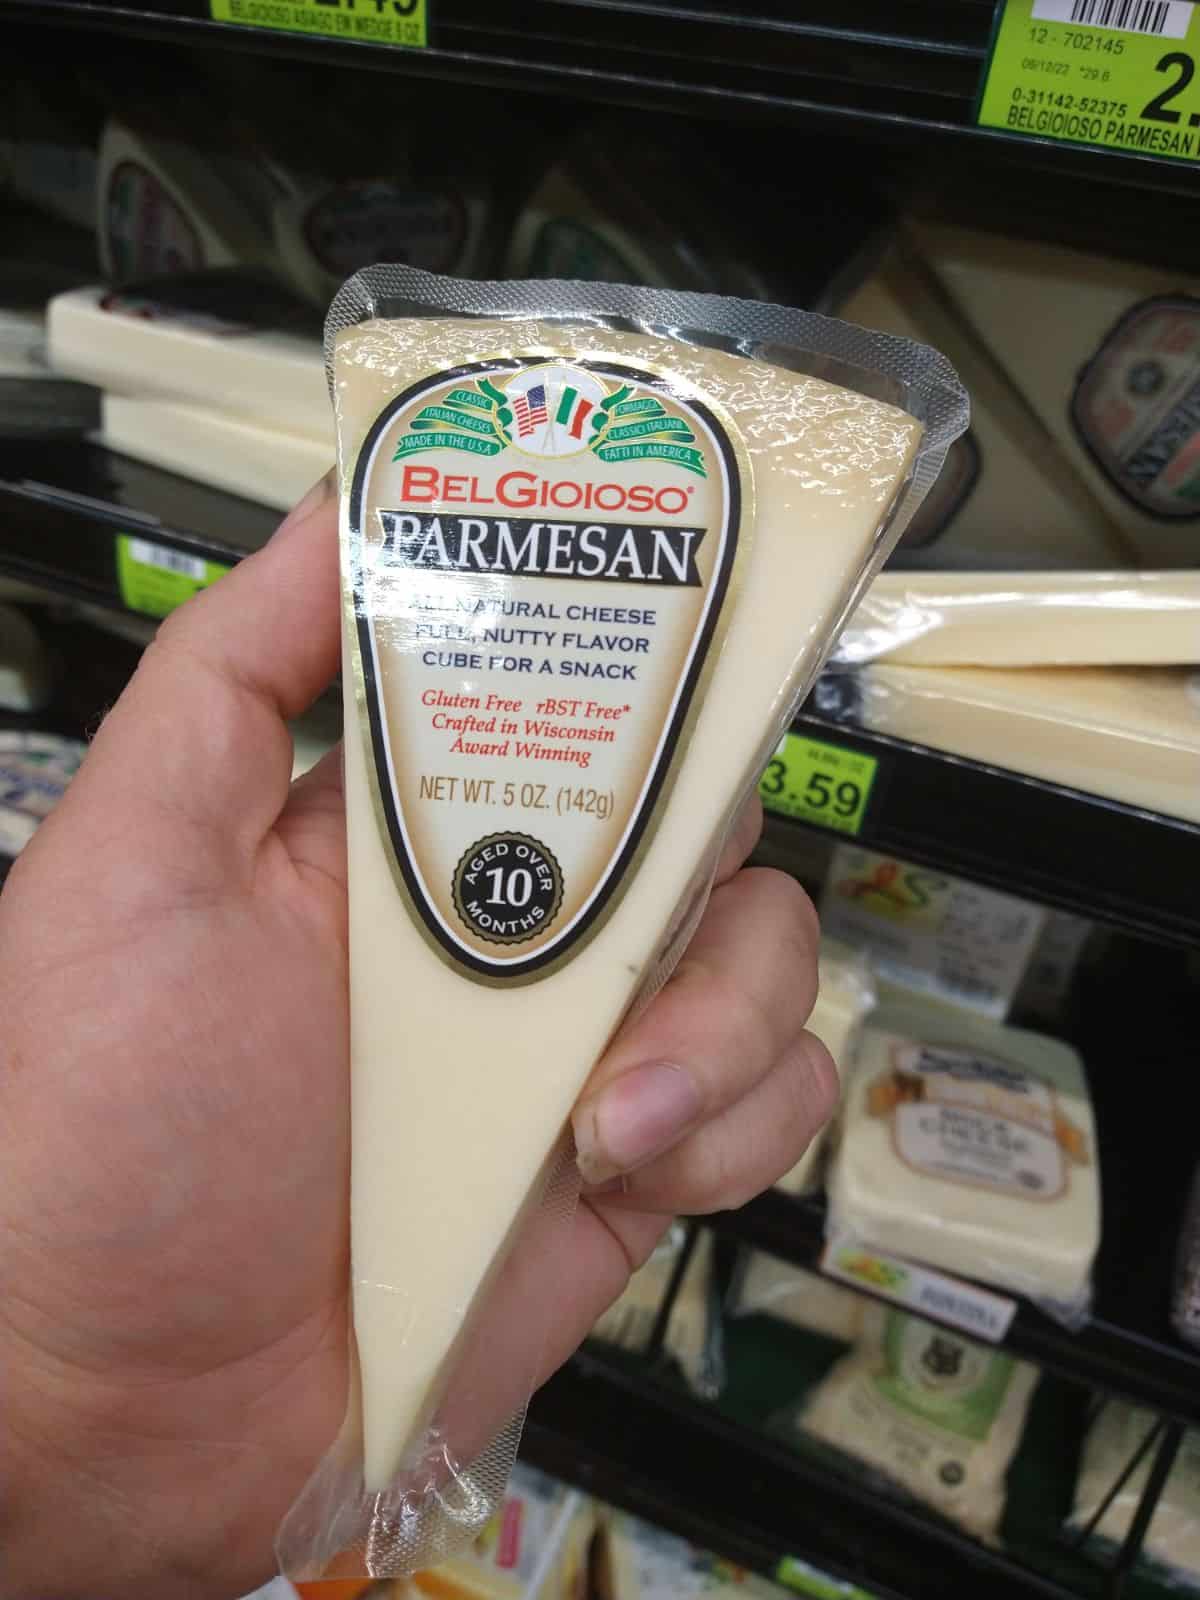 A wedge of BelGioIoso parmesan cheese is being held at the grocery store.